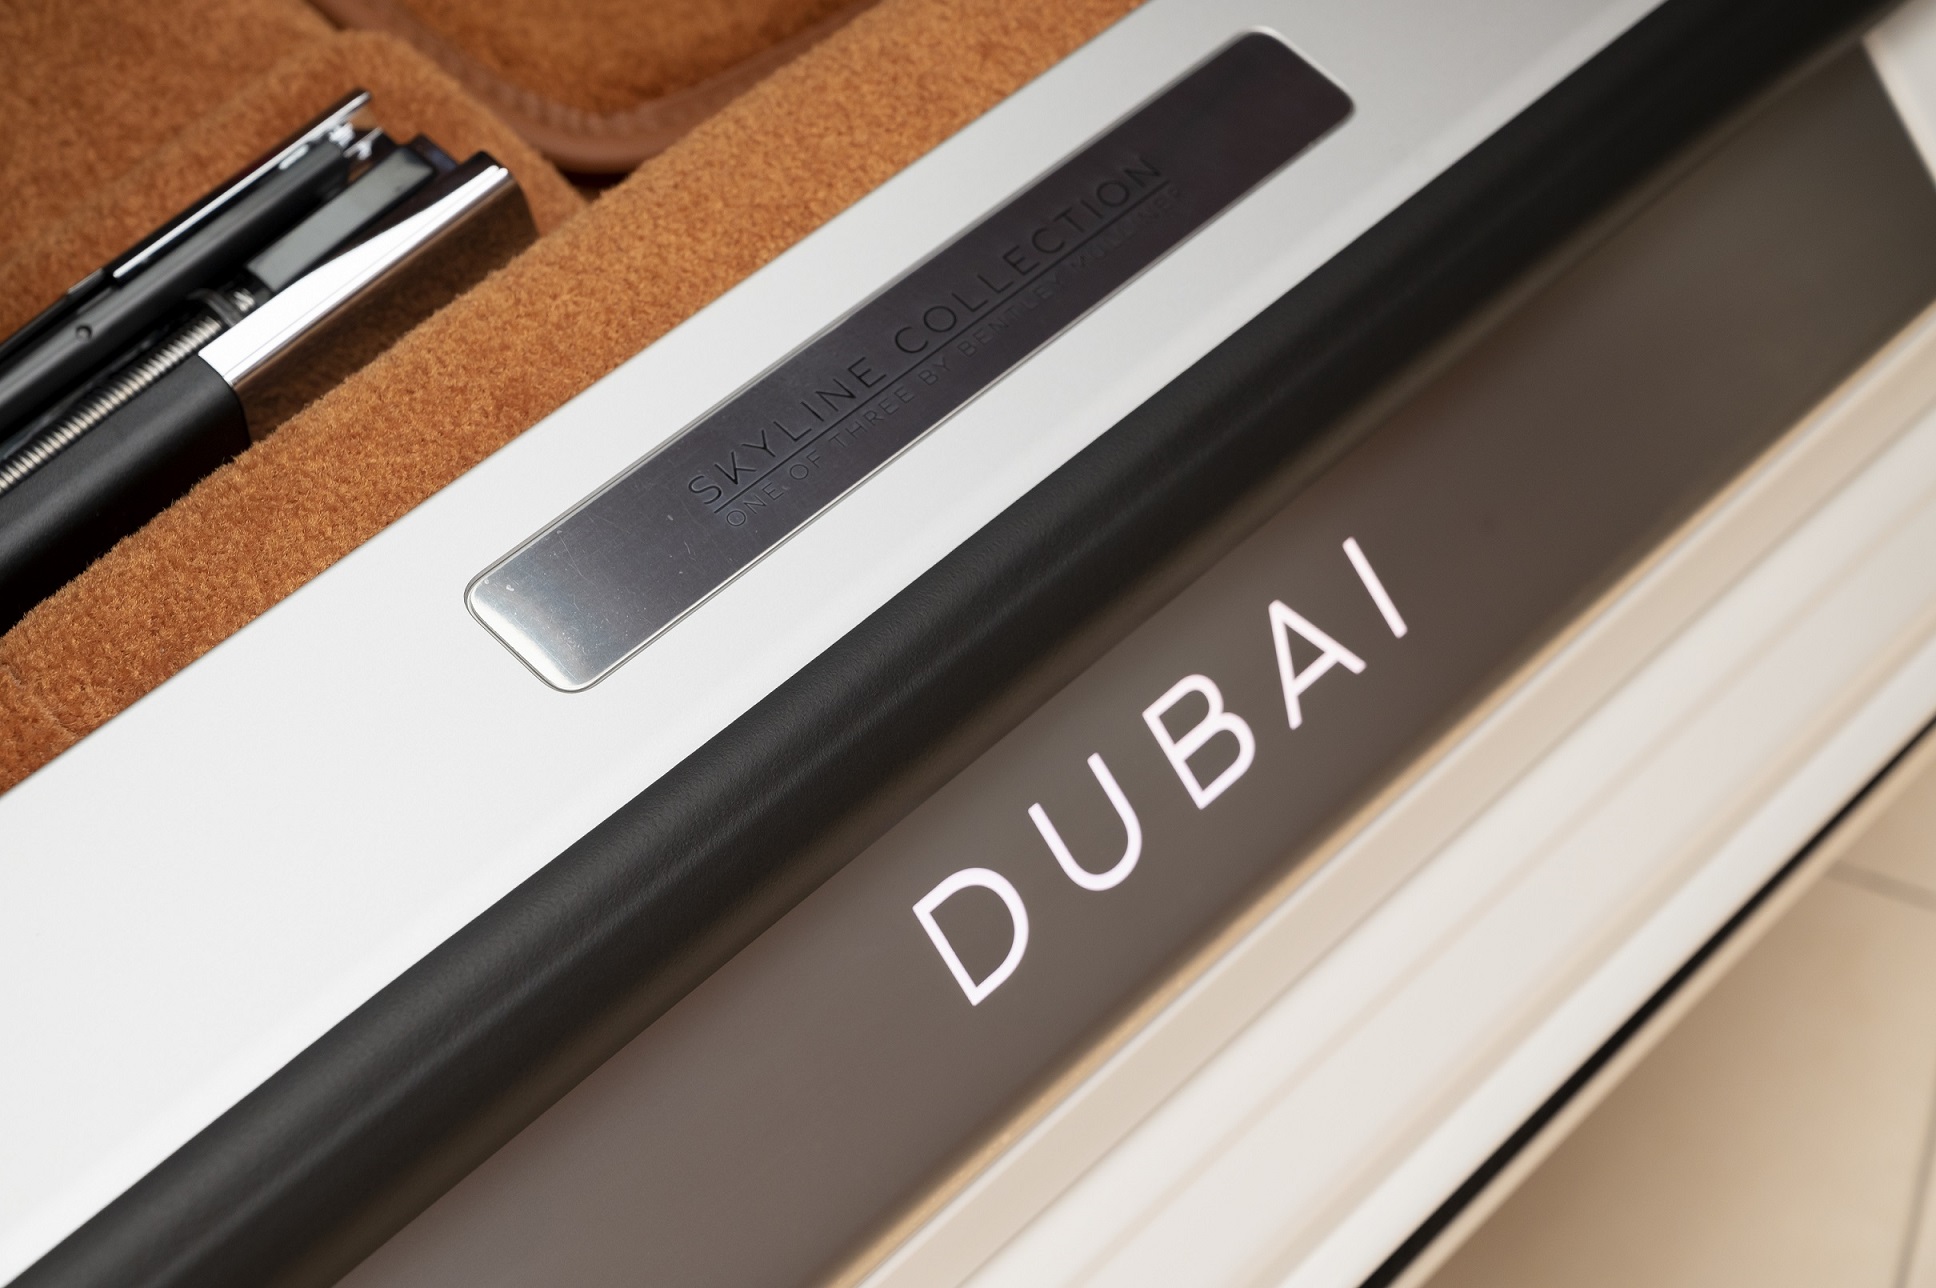 Bentley’s Mulliner designers have unveiled a special limited-edition collection, inspired by the UAE’s beautiful and iconic skylines of Abu Dhabi and Dubai.